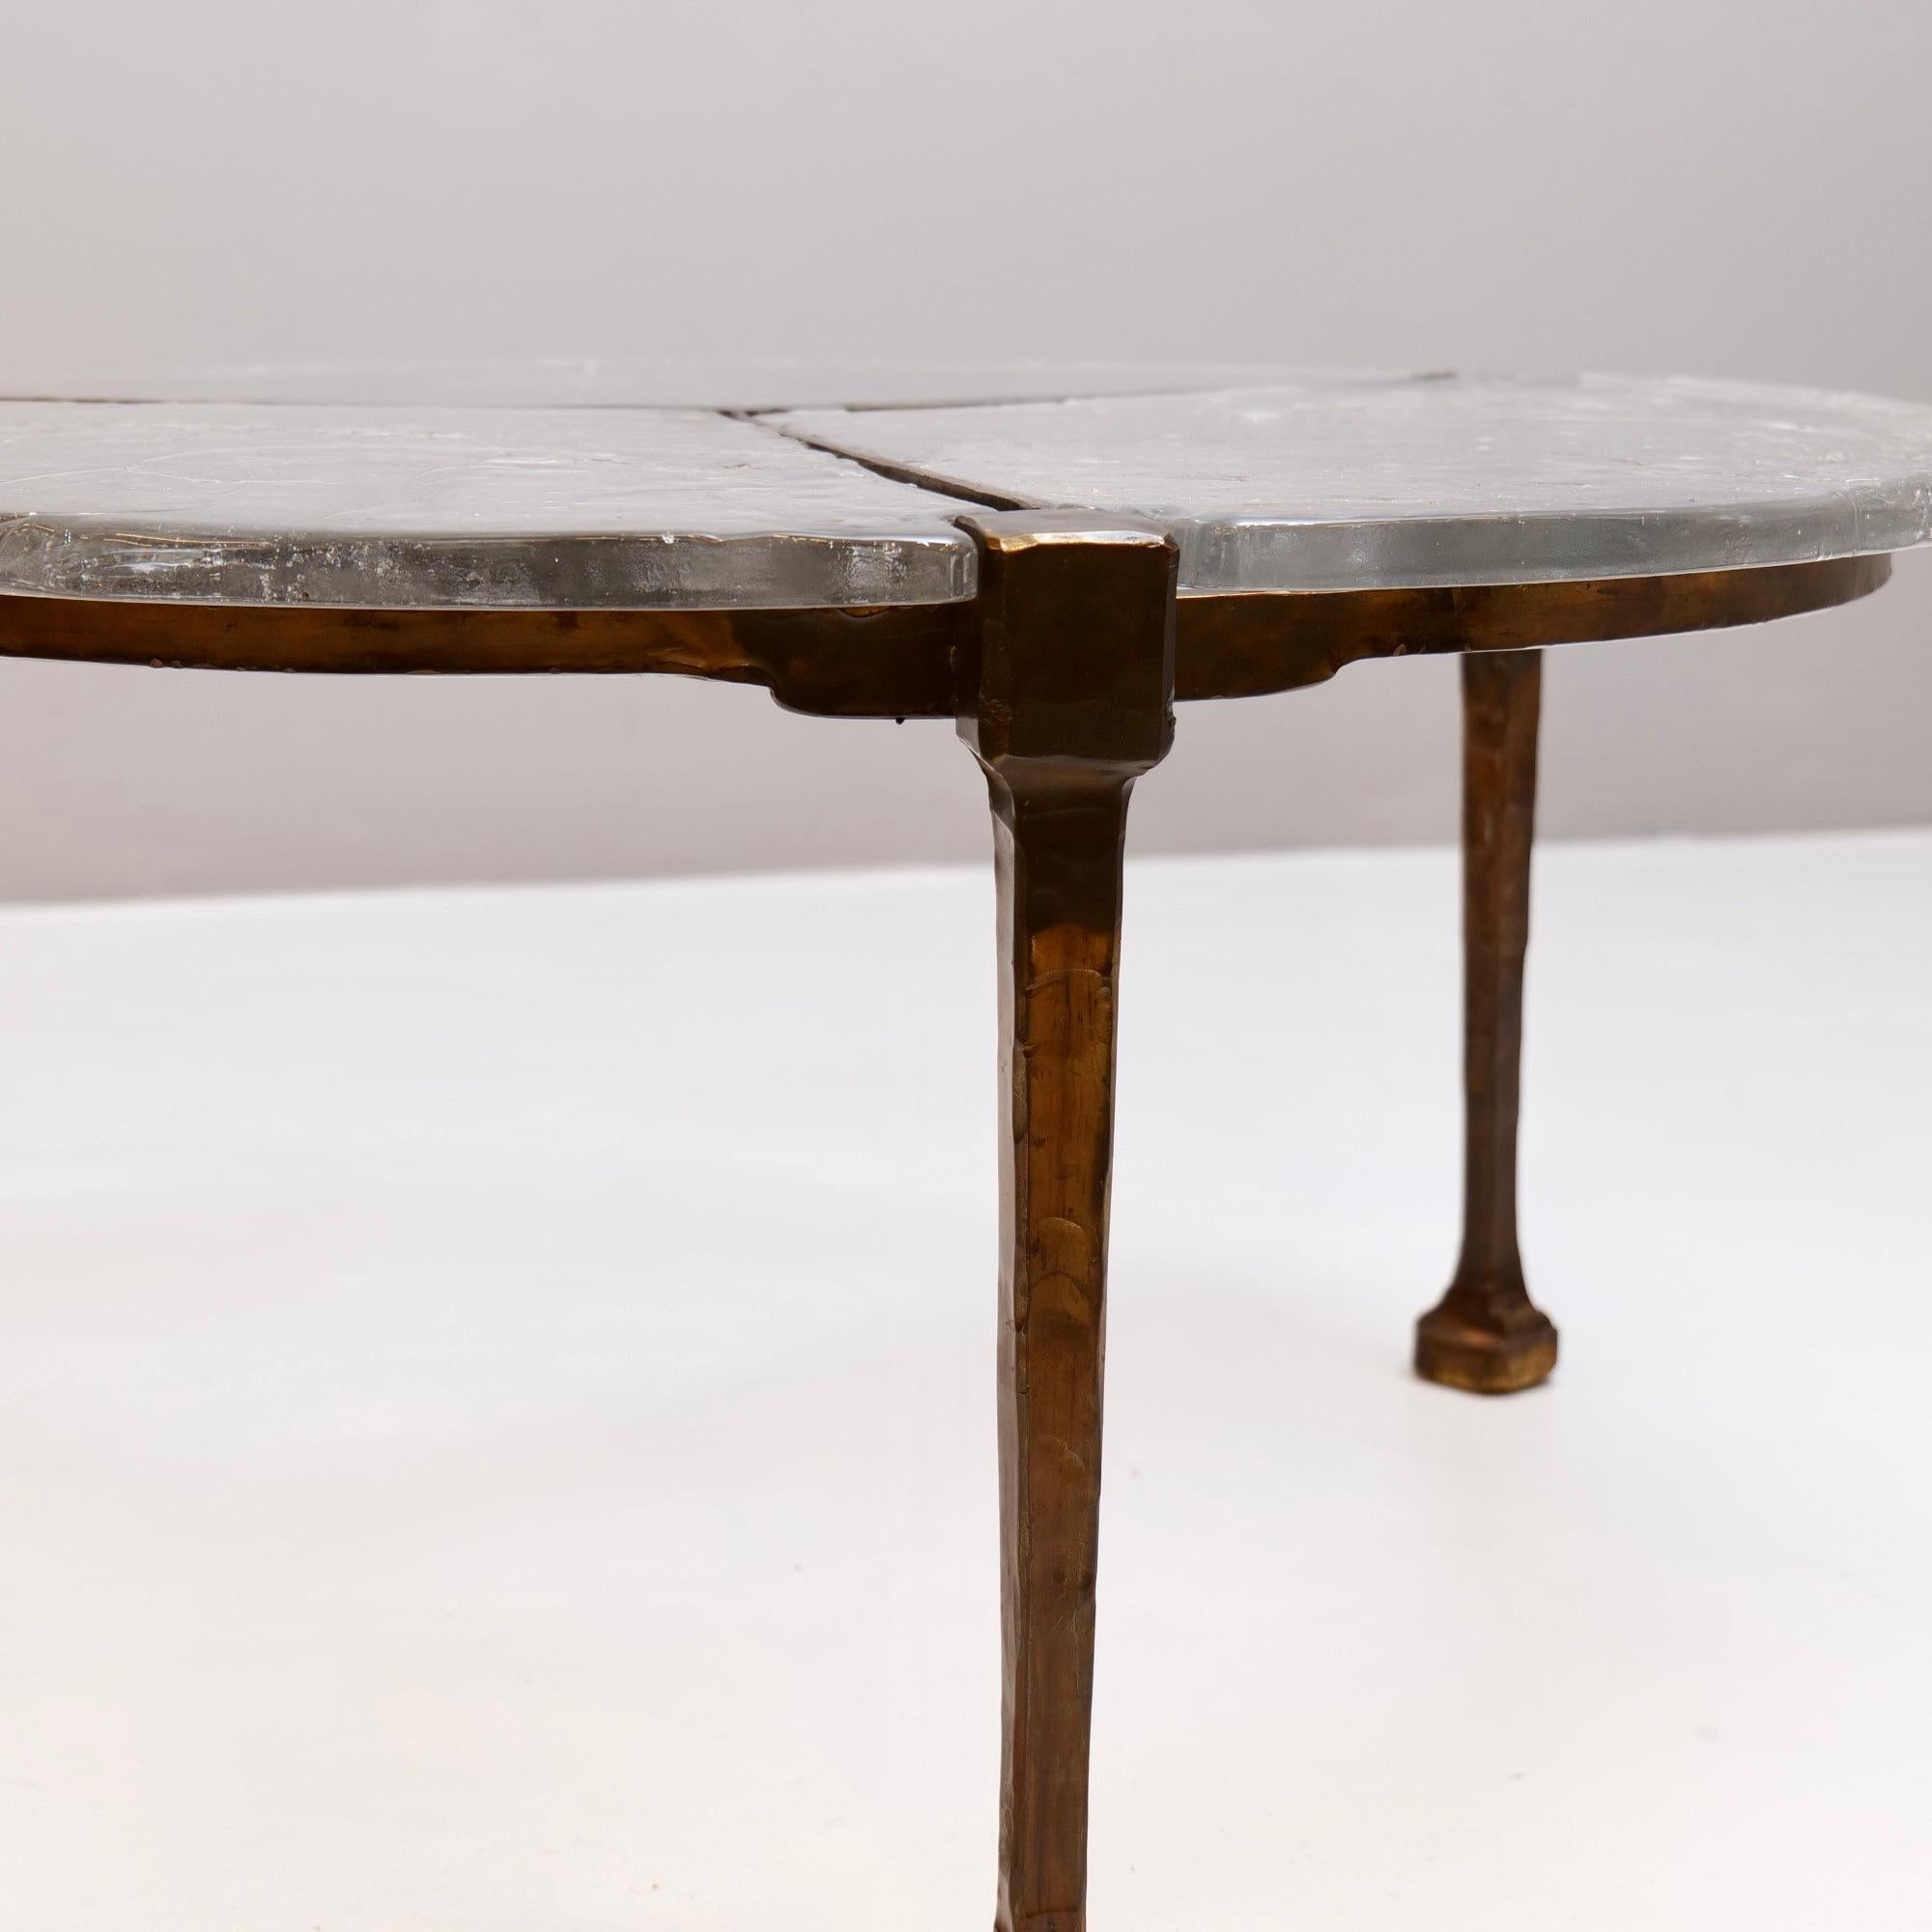 Late 20th Century forged bronze & glass table by Lothar Klute - 1980s For Sale